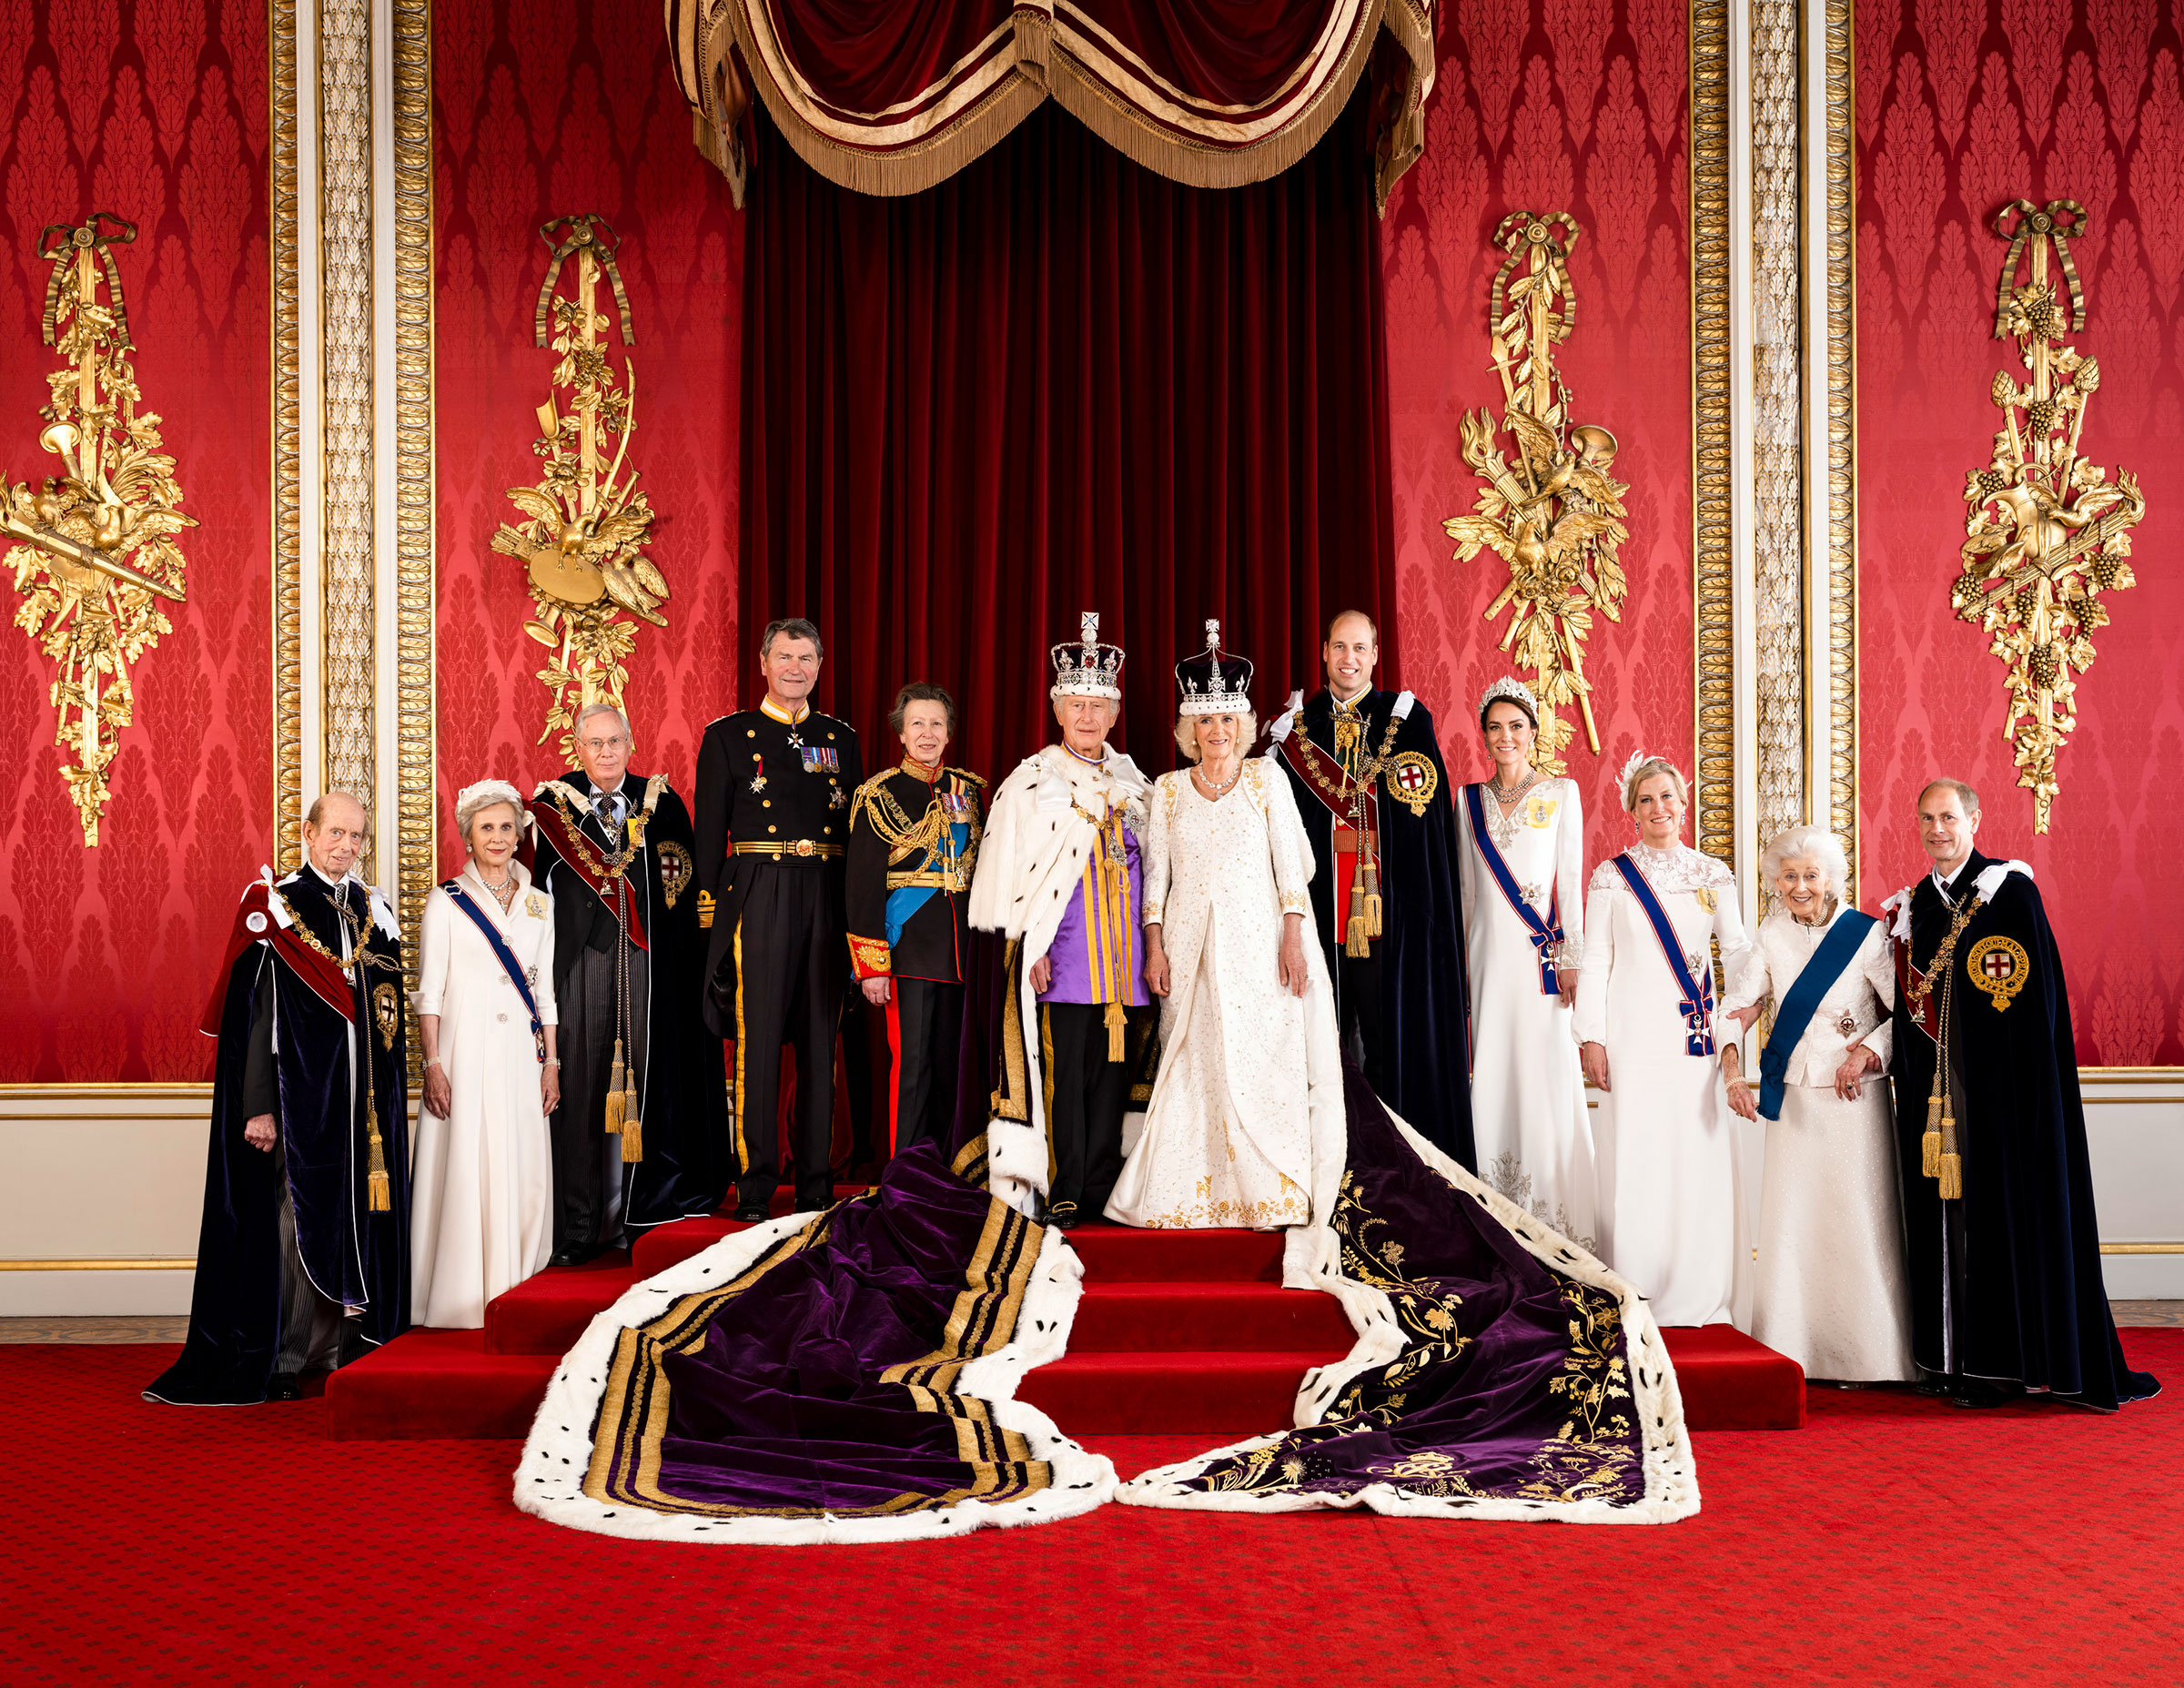 The Coronation Of Their Majesties King Charles III And Queen Camilla - Official Portraits